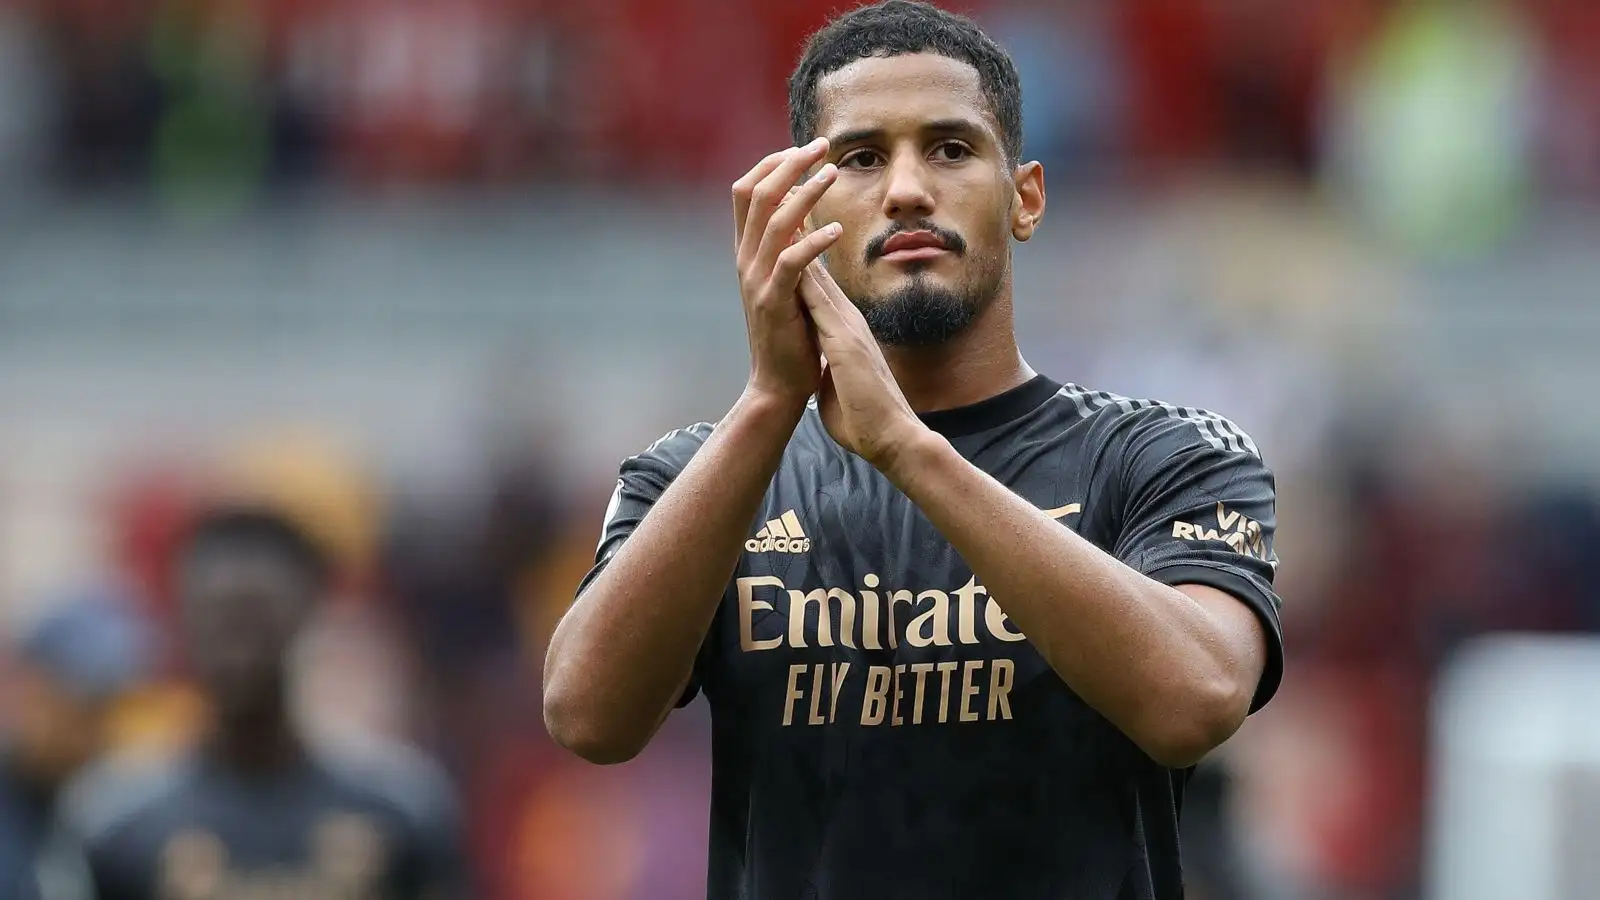 Arsenal defender William Saliba claps the supporters